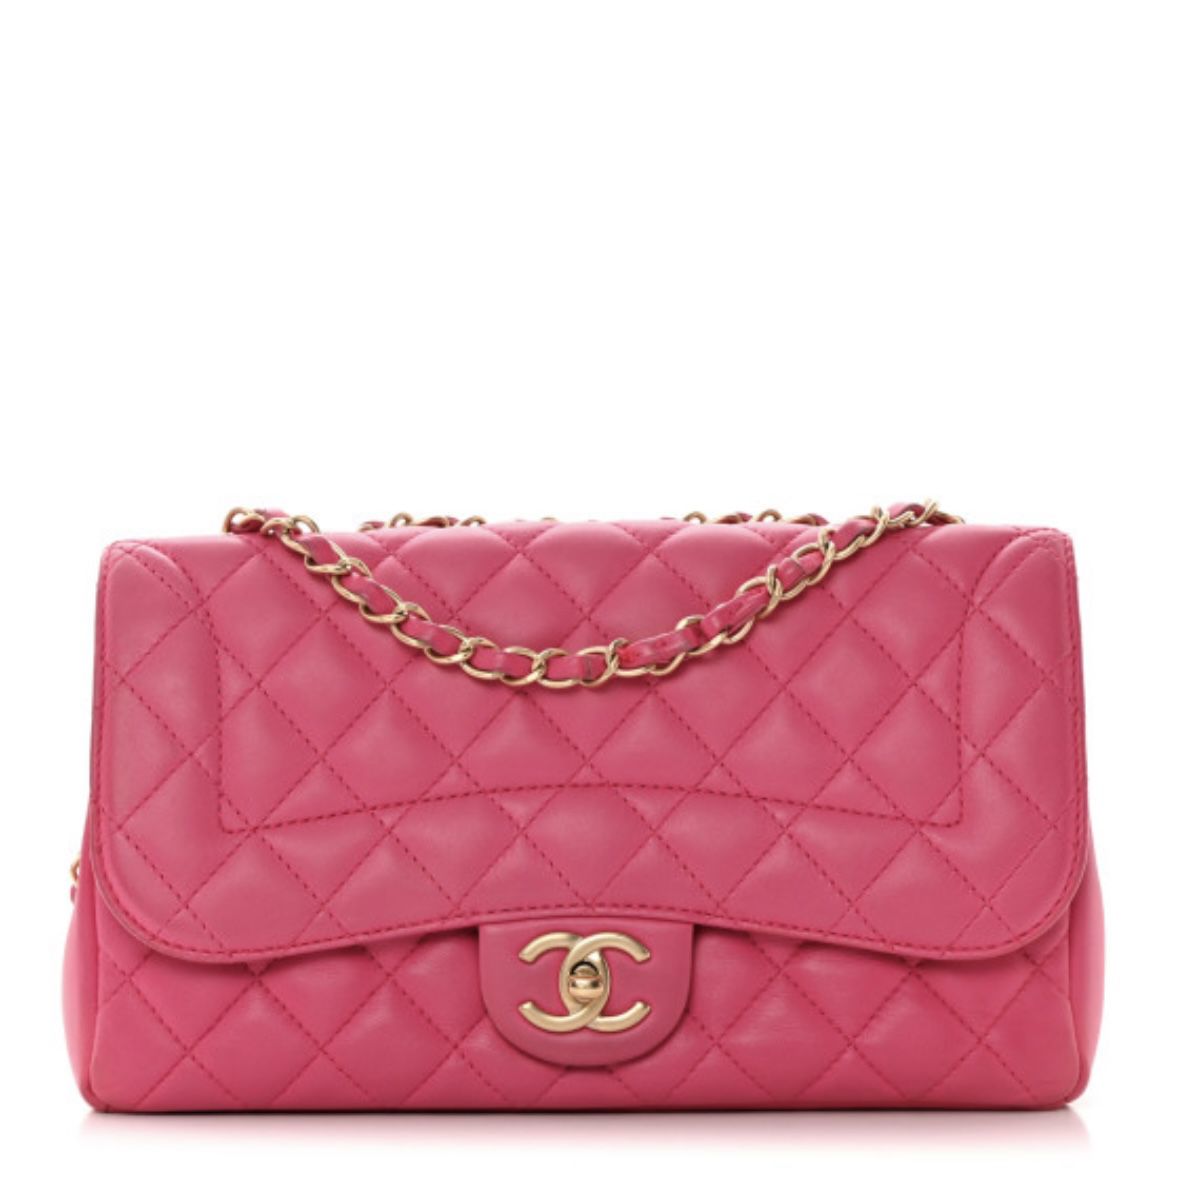 Chanel Lambskin Quilted Medium Mademoiselle Chic Flap Pink